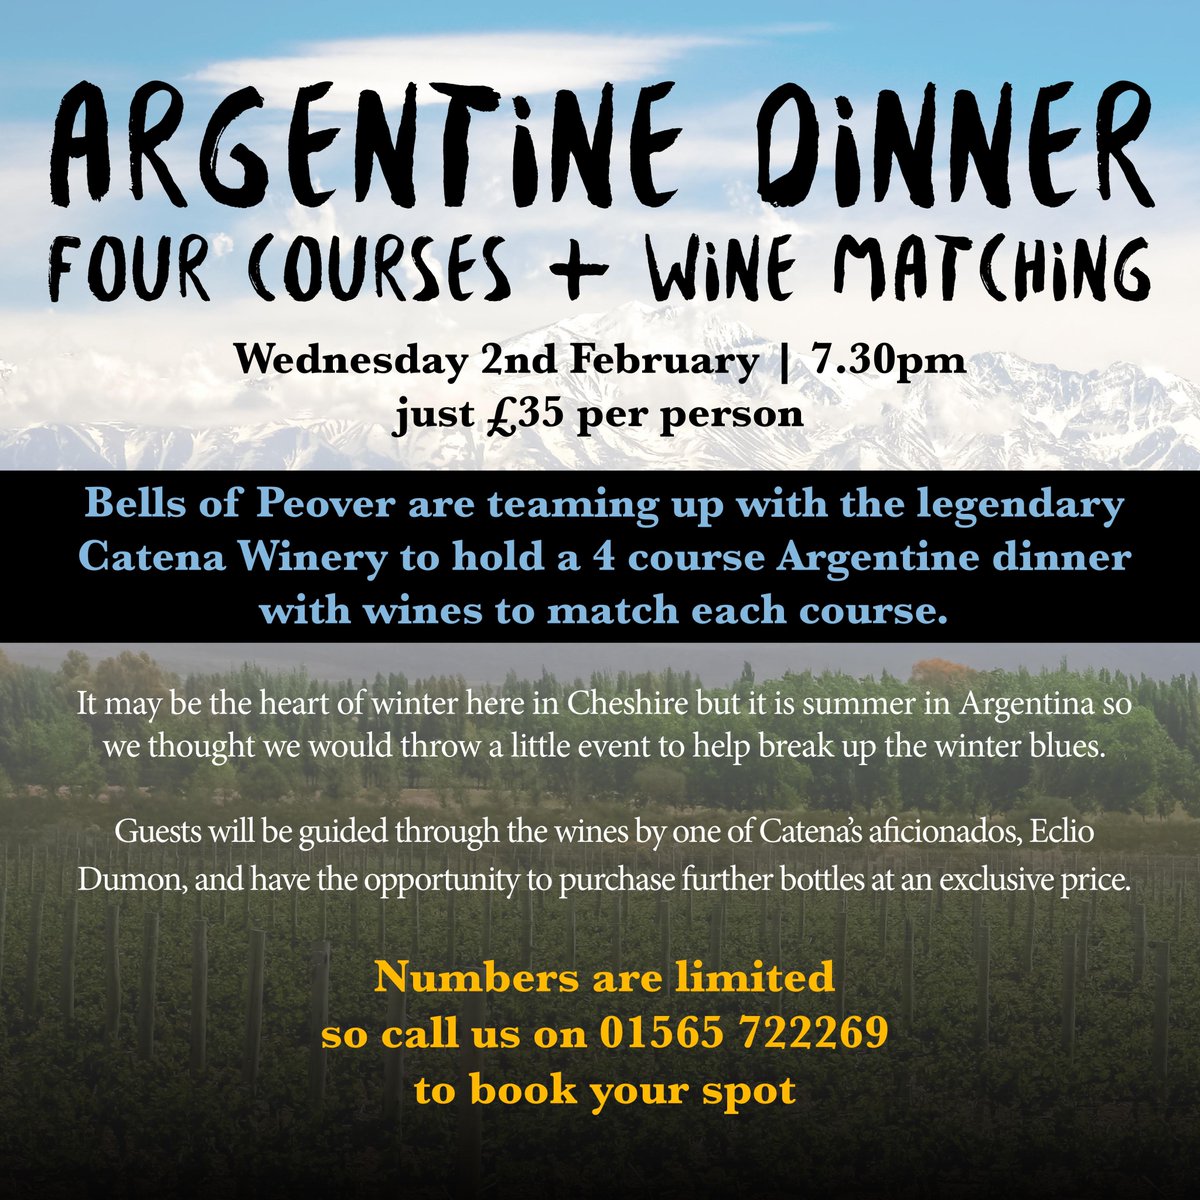 Fancy an evening of dinner and wine matching at @bellsofpeover? Well, you're in luck! Enjoy a fun-filled evening on Wednesday 2nd February where you will be guided though the wines by one of Catena's aficionados, Eclio Dumon. Call the pub on 01565 722269 to book your spot!